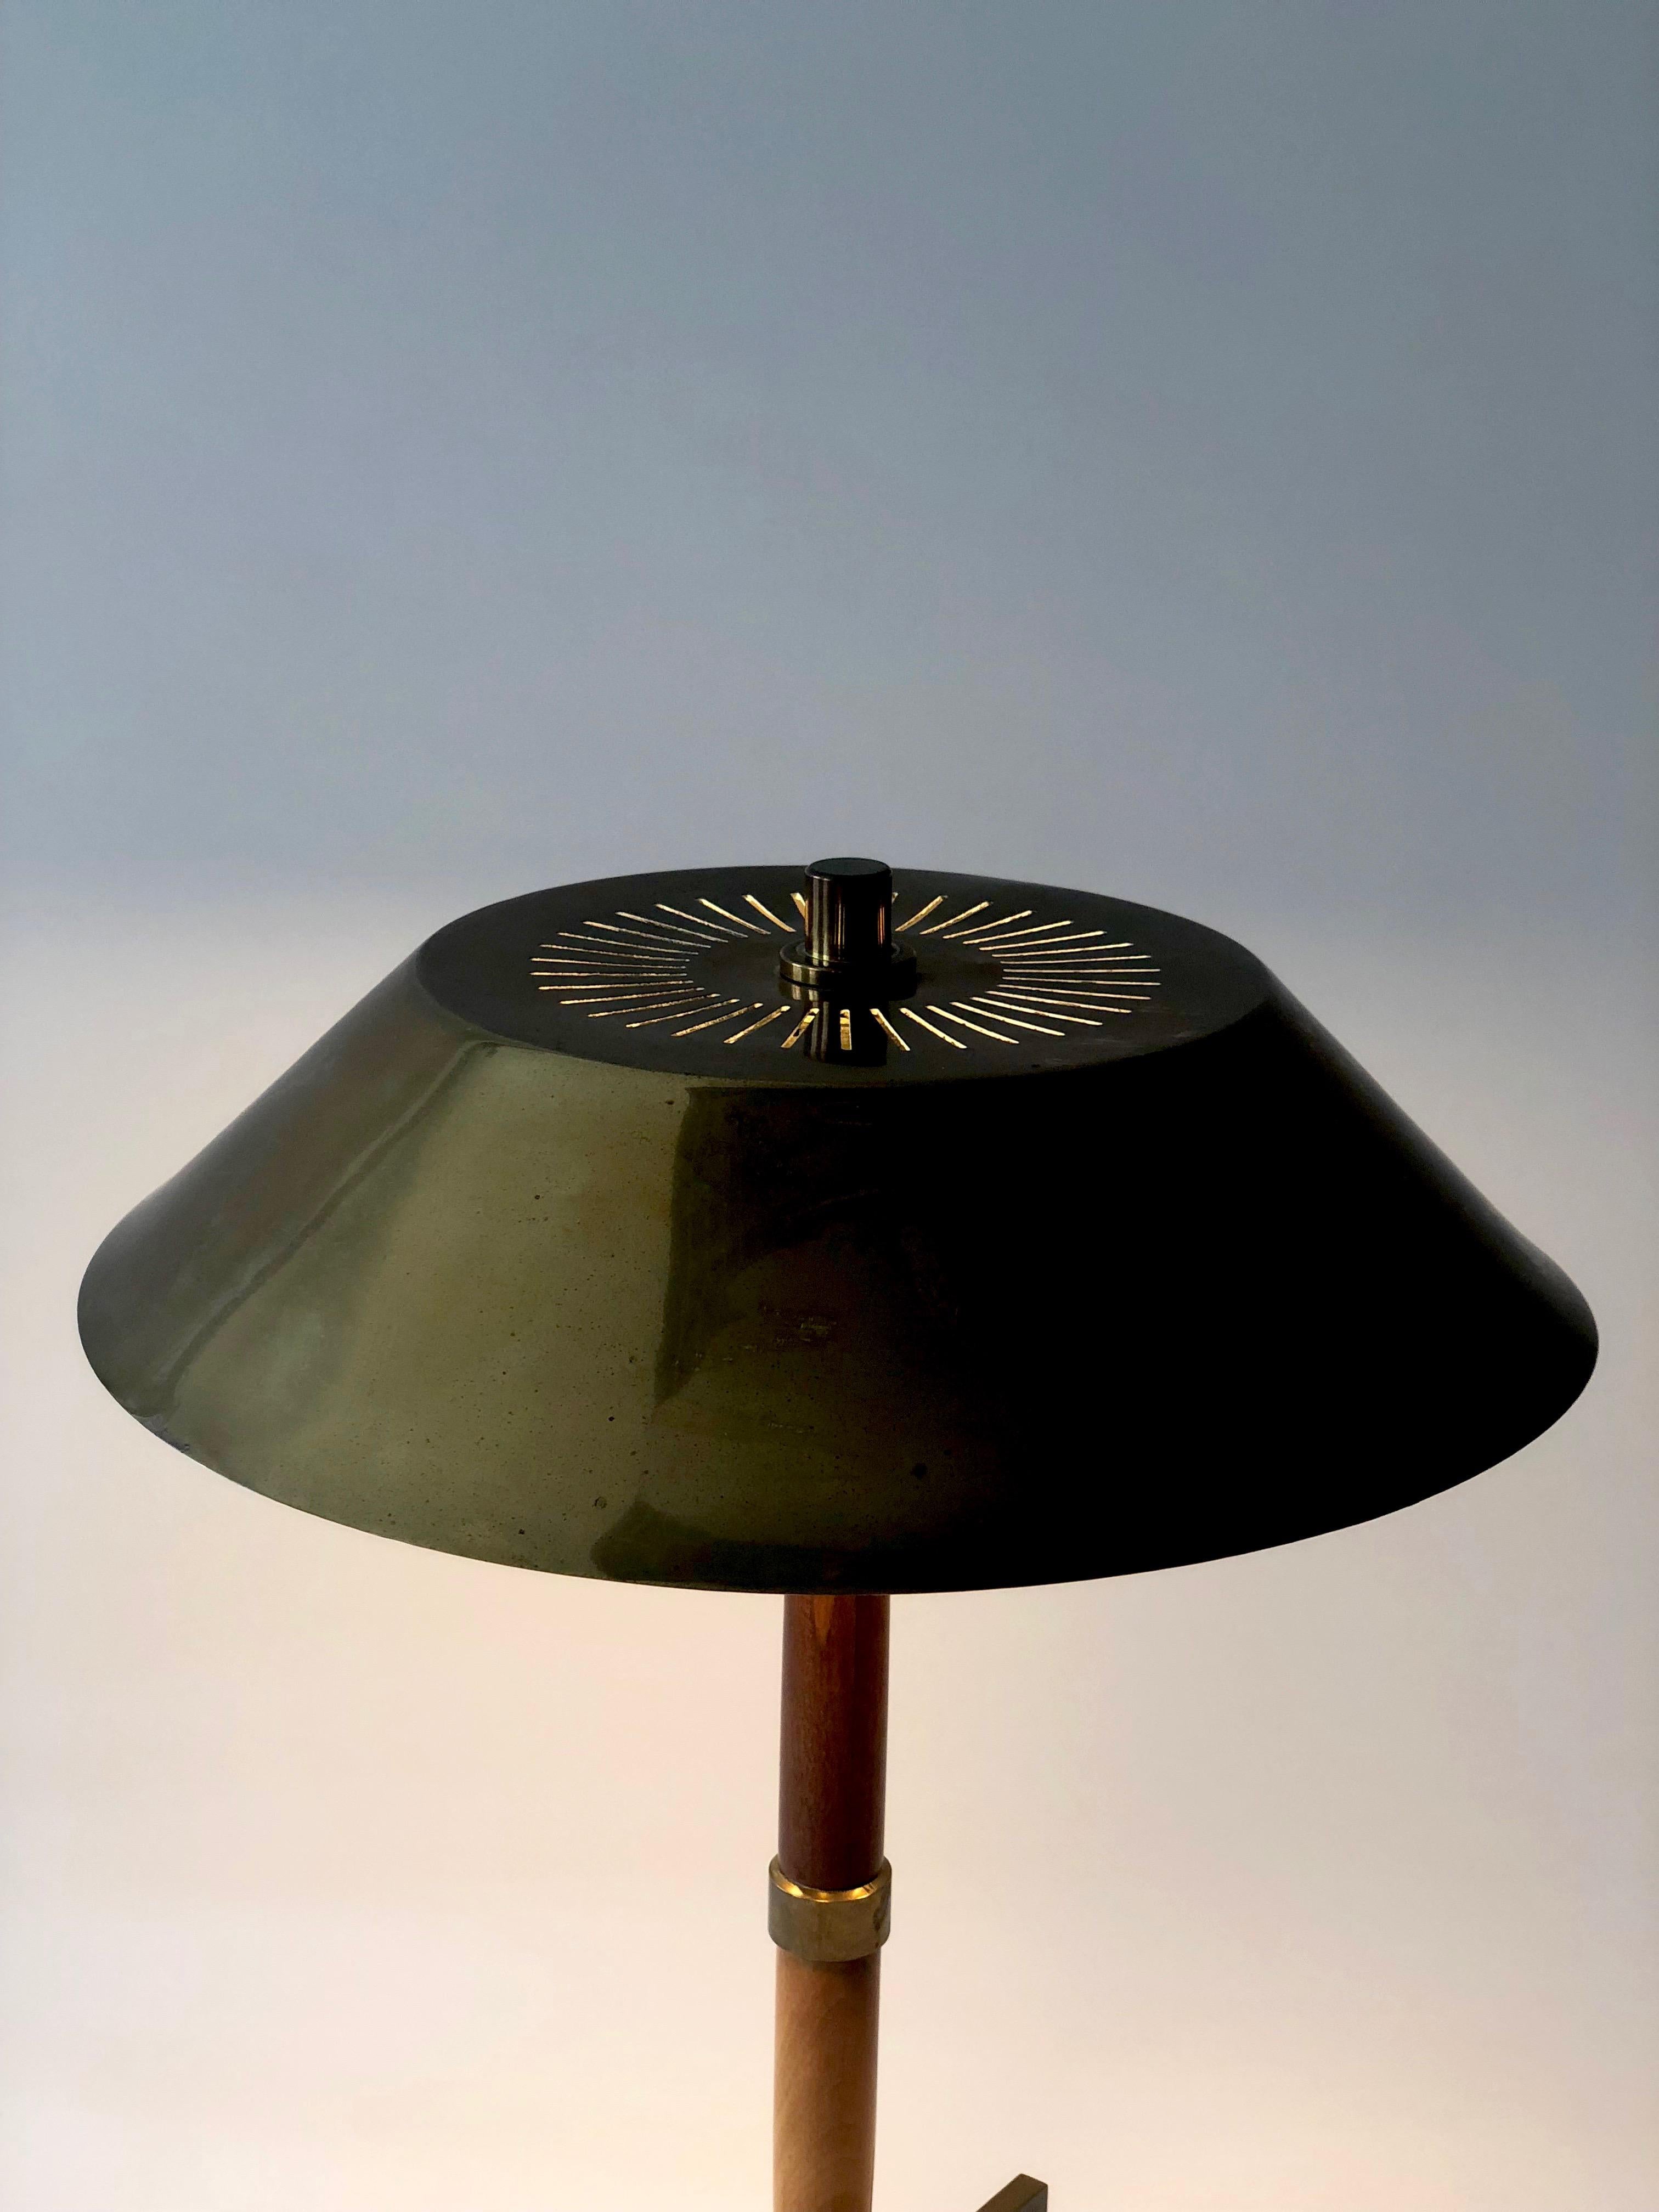 Early 20th Century Beautiful Table Lamp from the 1920's, Austria- Czech Republic